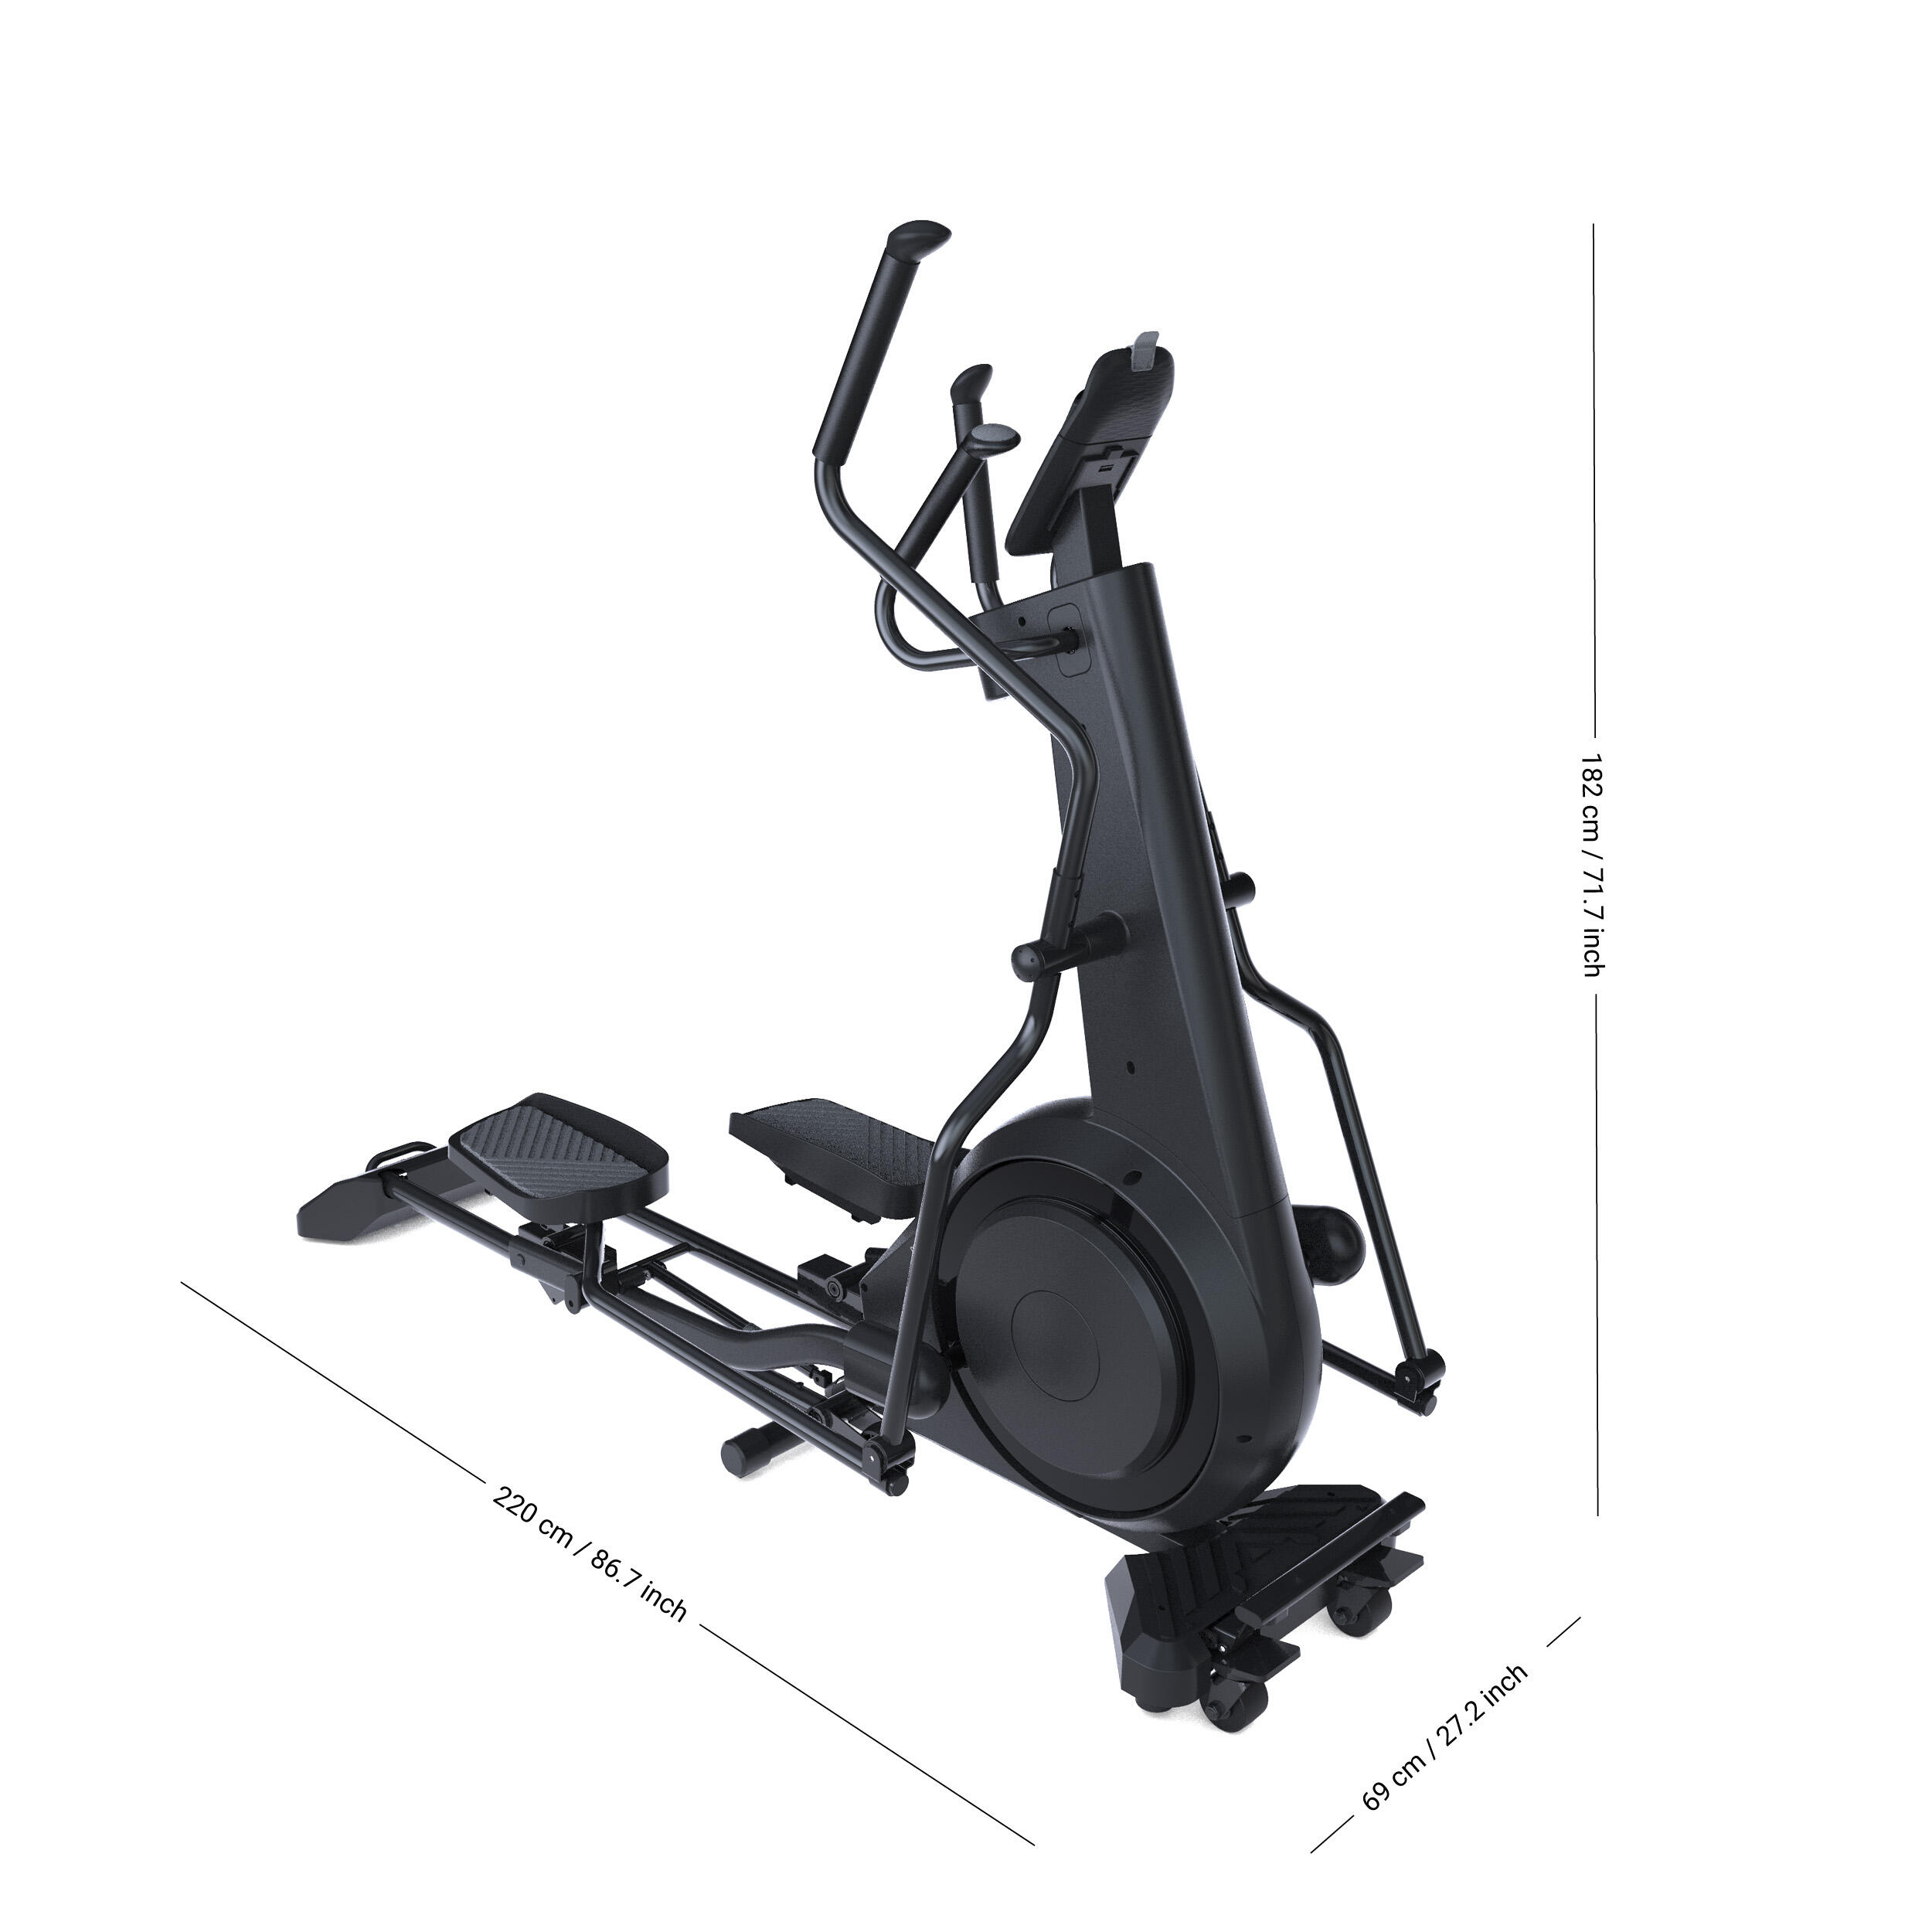 Front Wheel Folding Connected Self-Powered Cross Trainer Challenge Elliptical 3/6